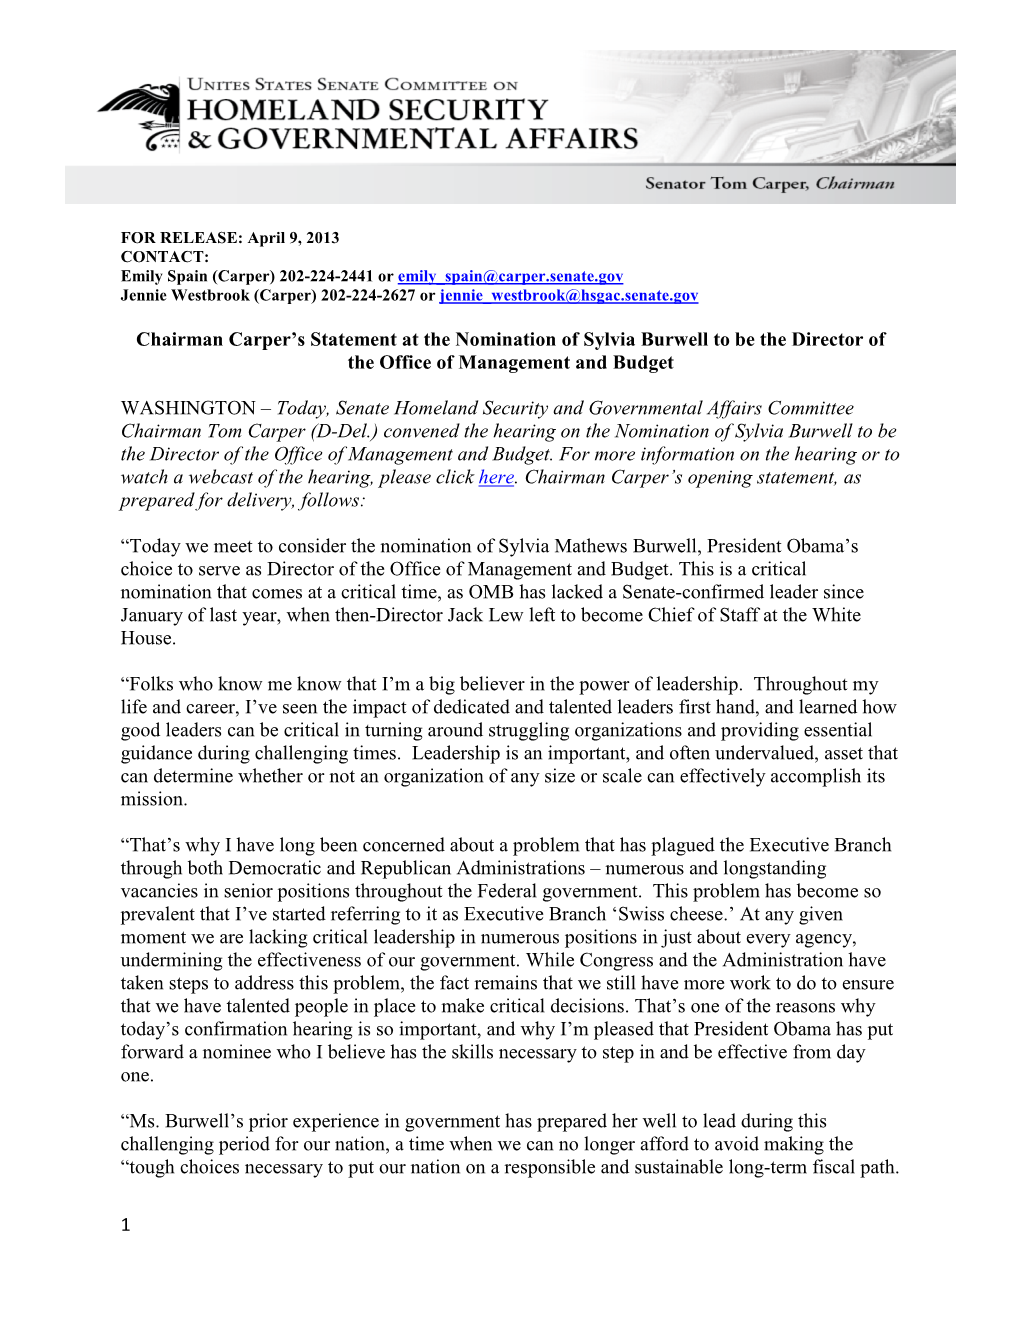 1 Chairman Carper's Statement at the Nomination of Sylvia Burwell to Be